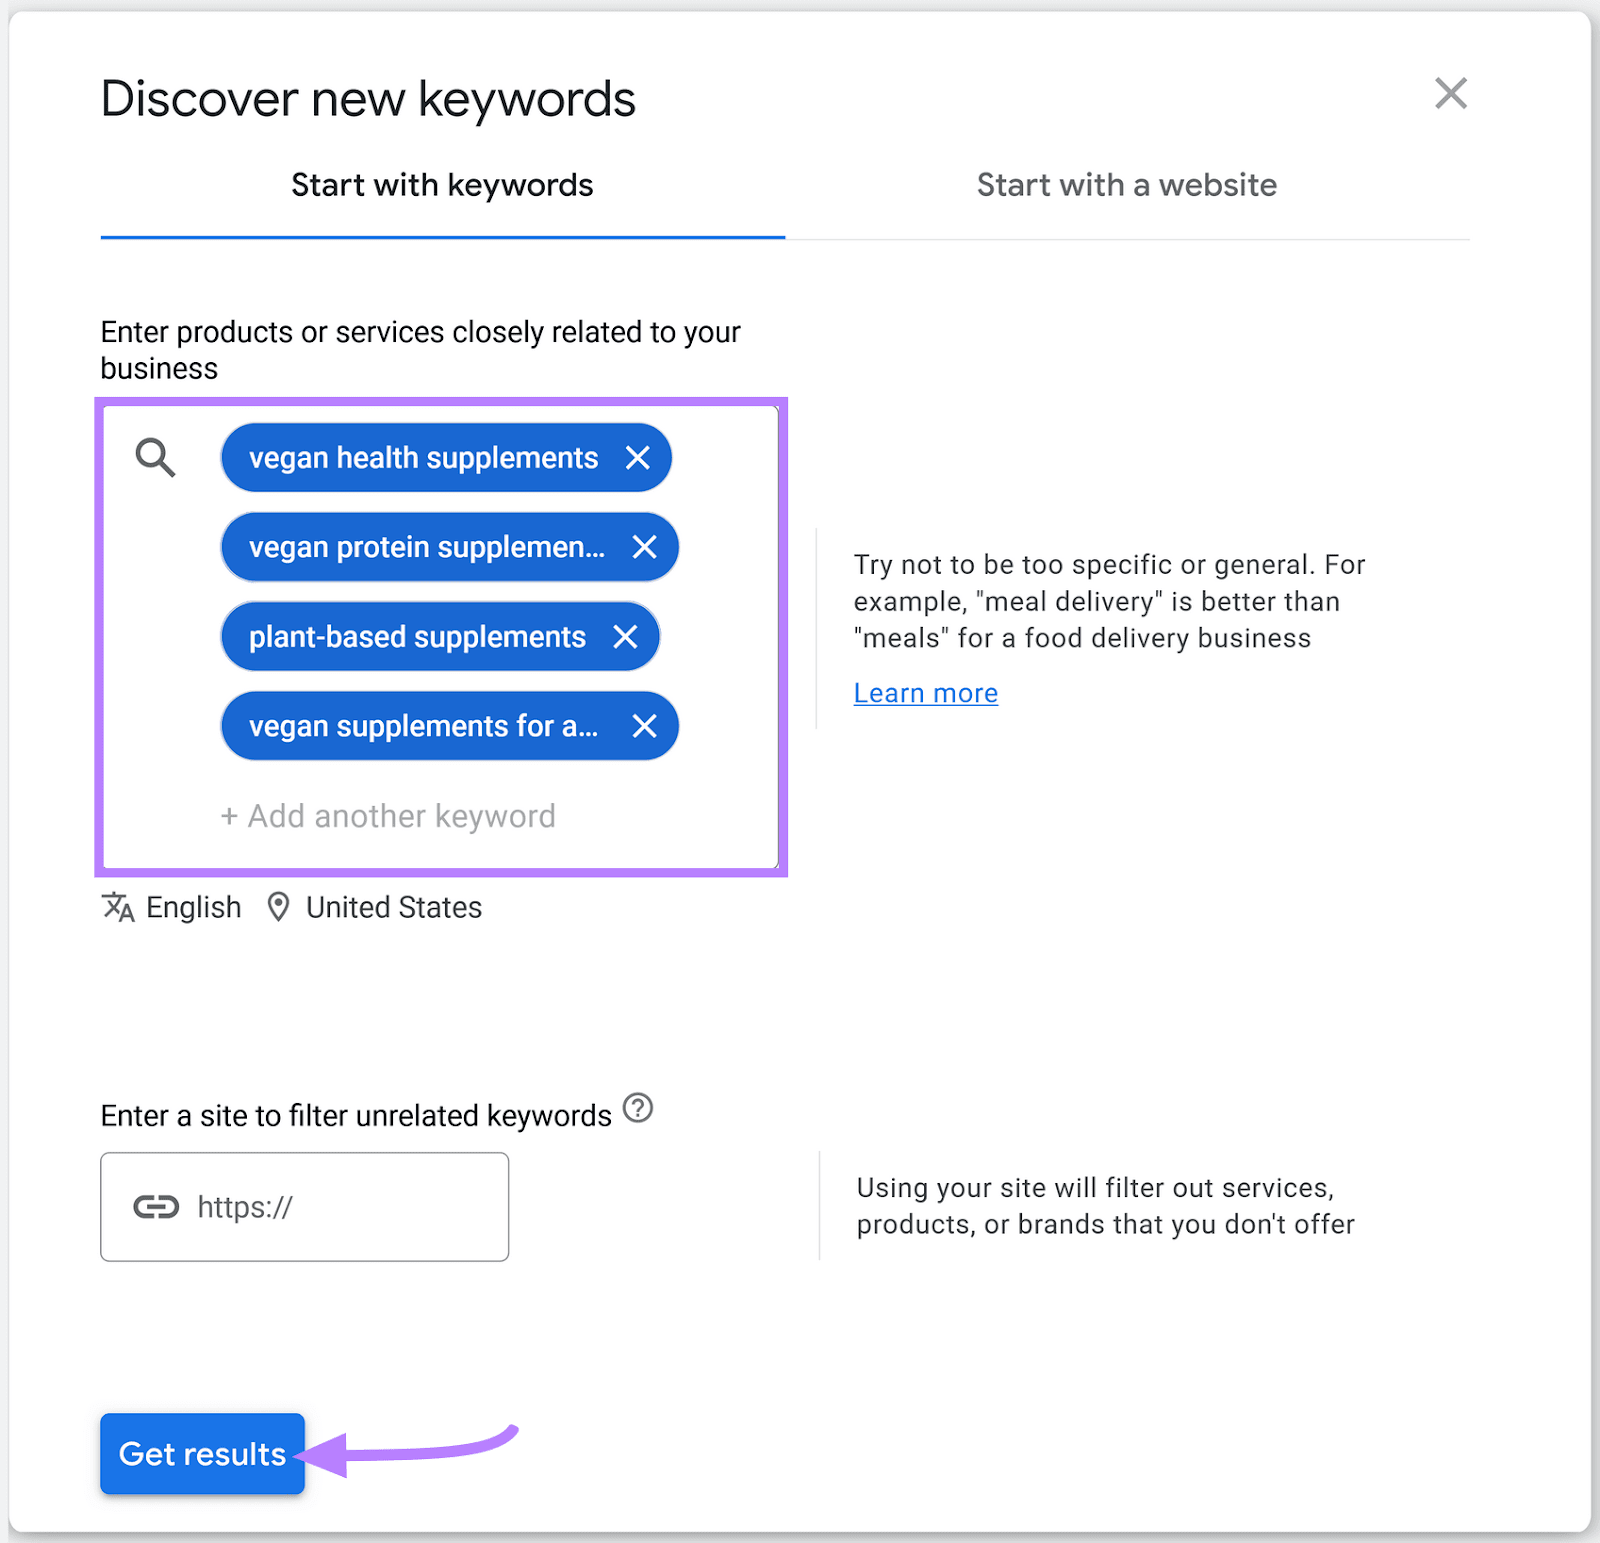 "Get results" button highlighted at the bottom of "Discover new keywords" window